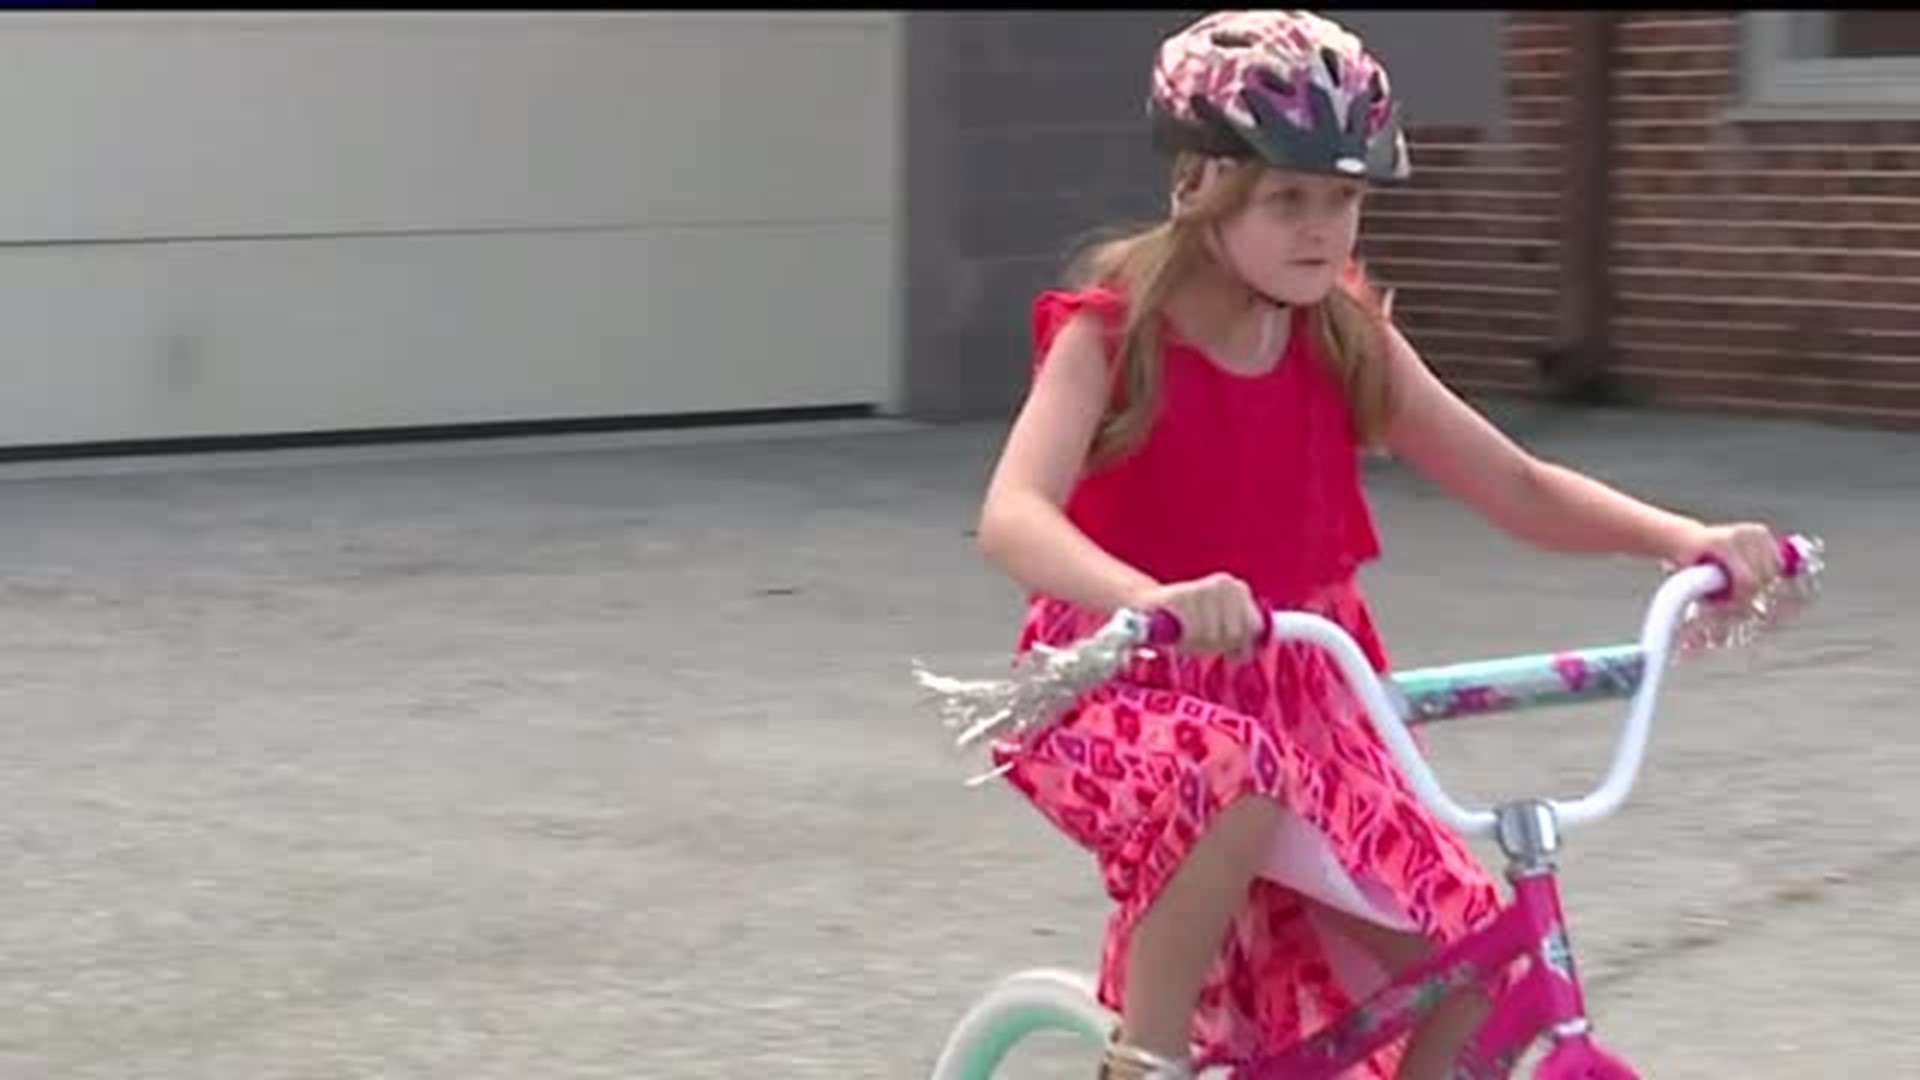 Police chief in York Co. gives little girl a big surprise after her bike was stolen